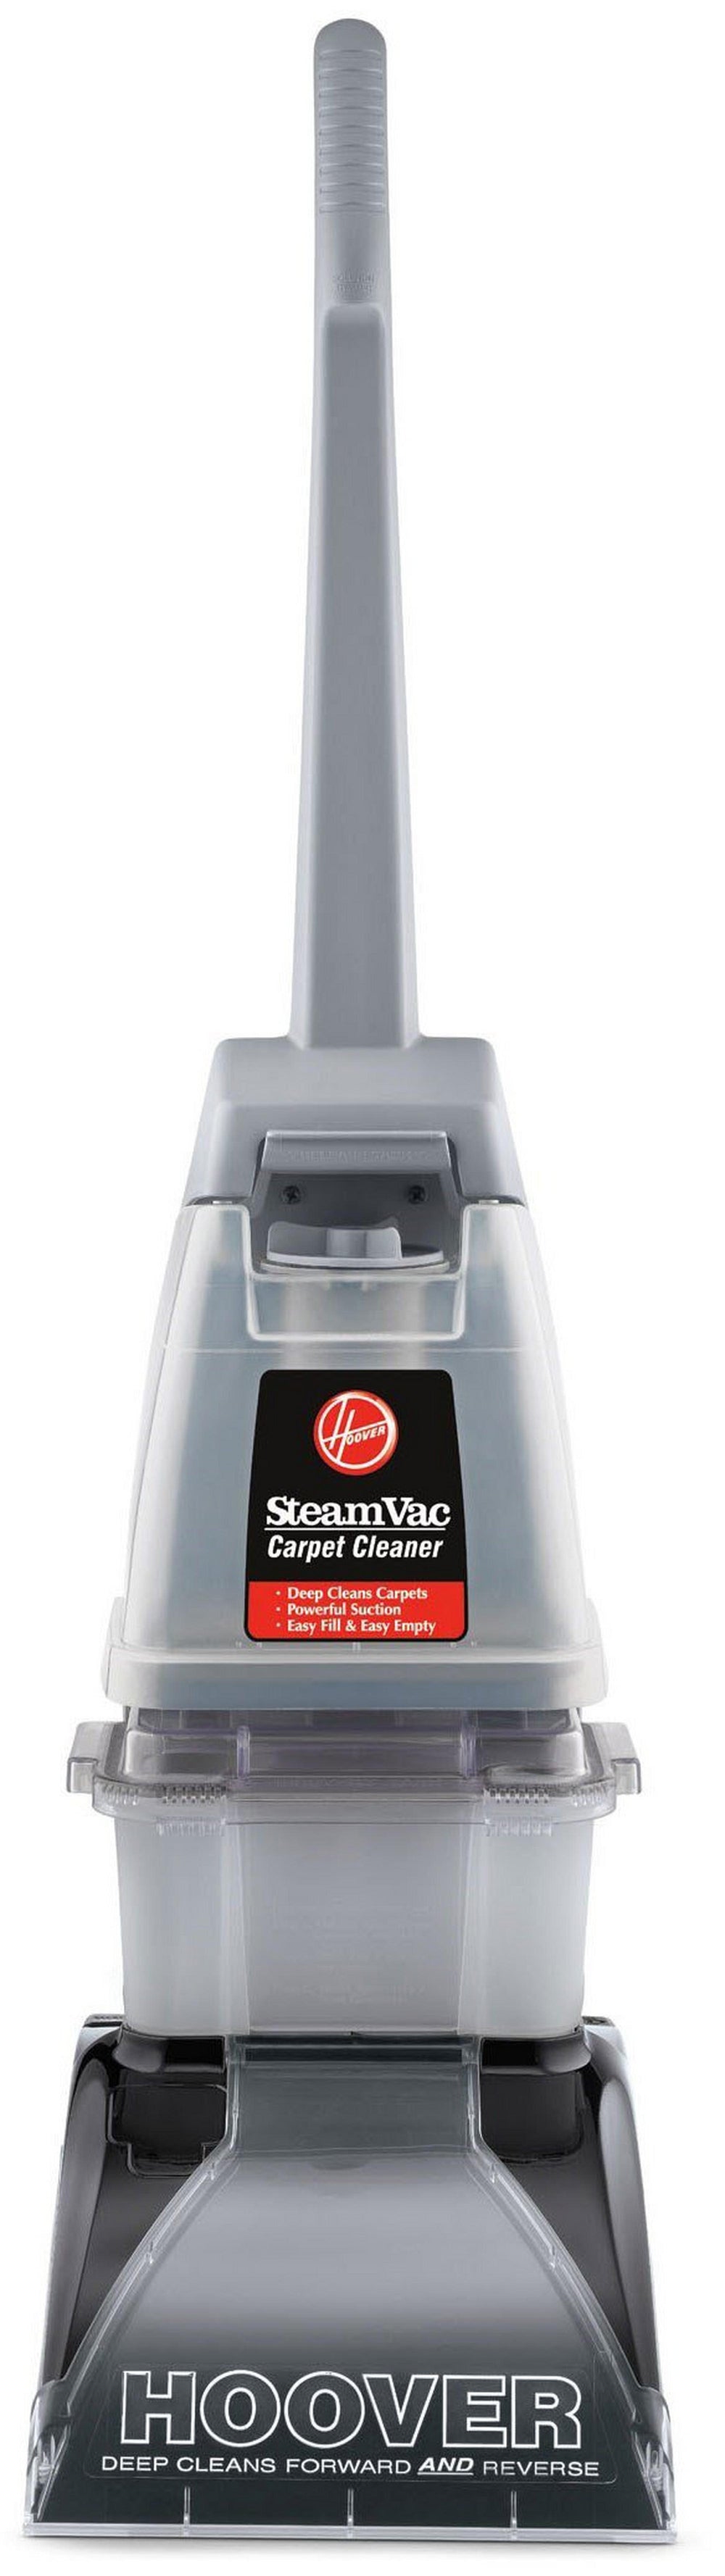 Reconditioned SteamVac Carpet Cleaner1